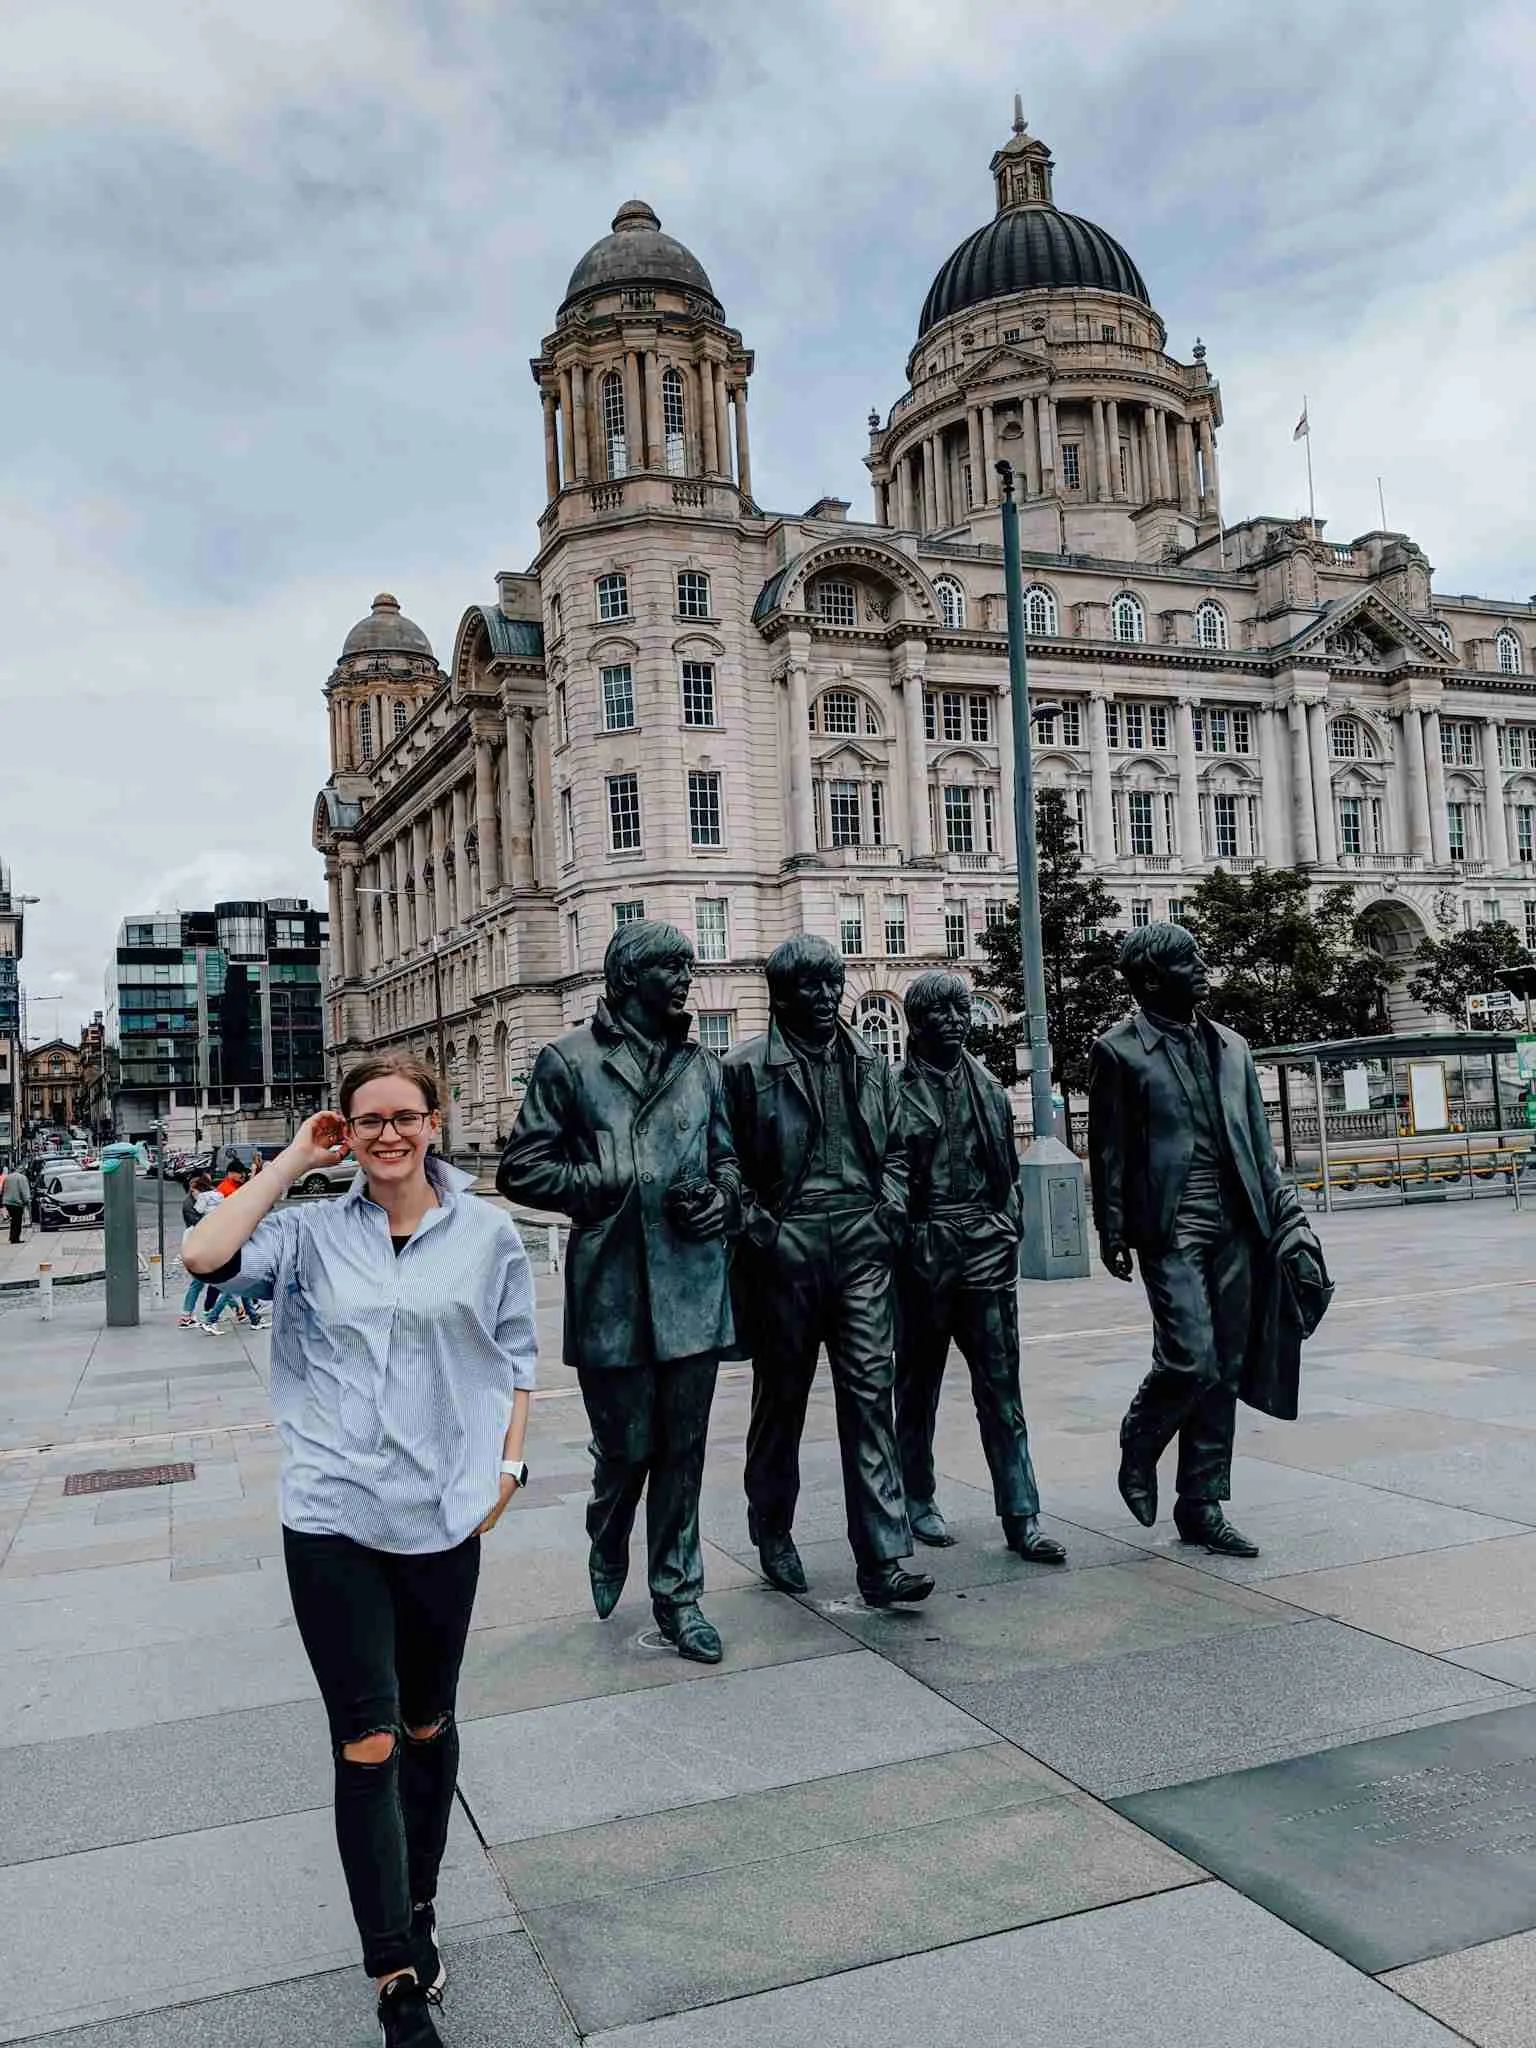 A girl walking away from the Beatles statue in Liverpool, one of the stops on this UK road trip 